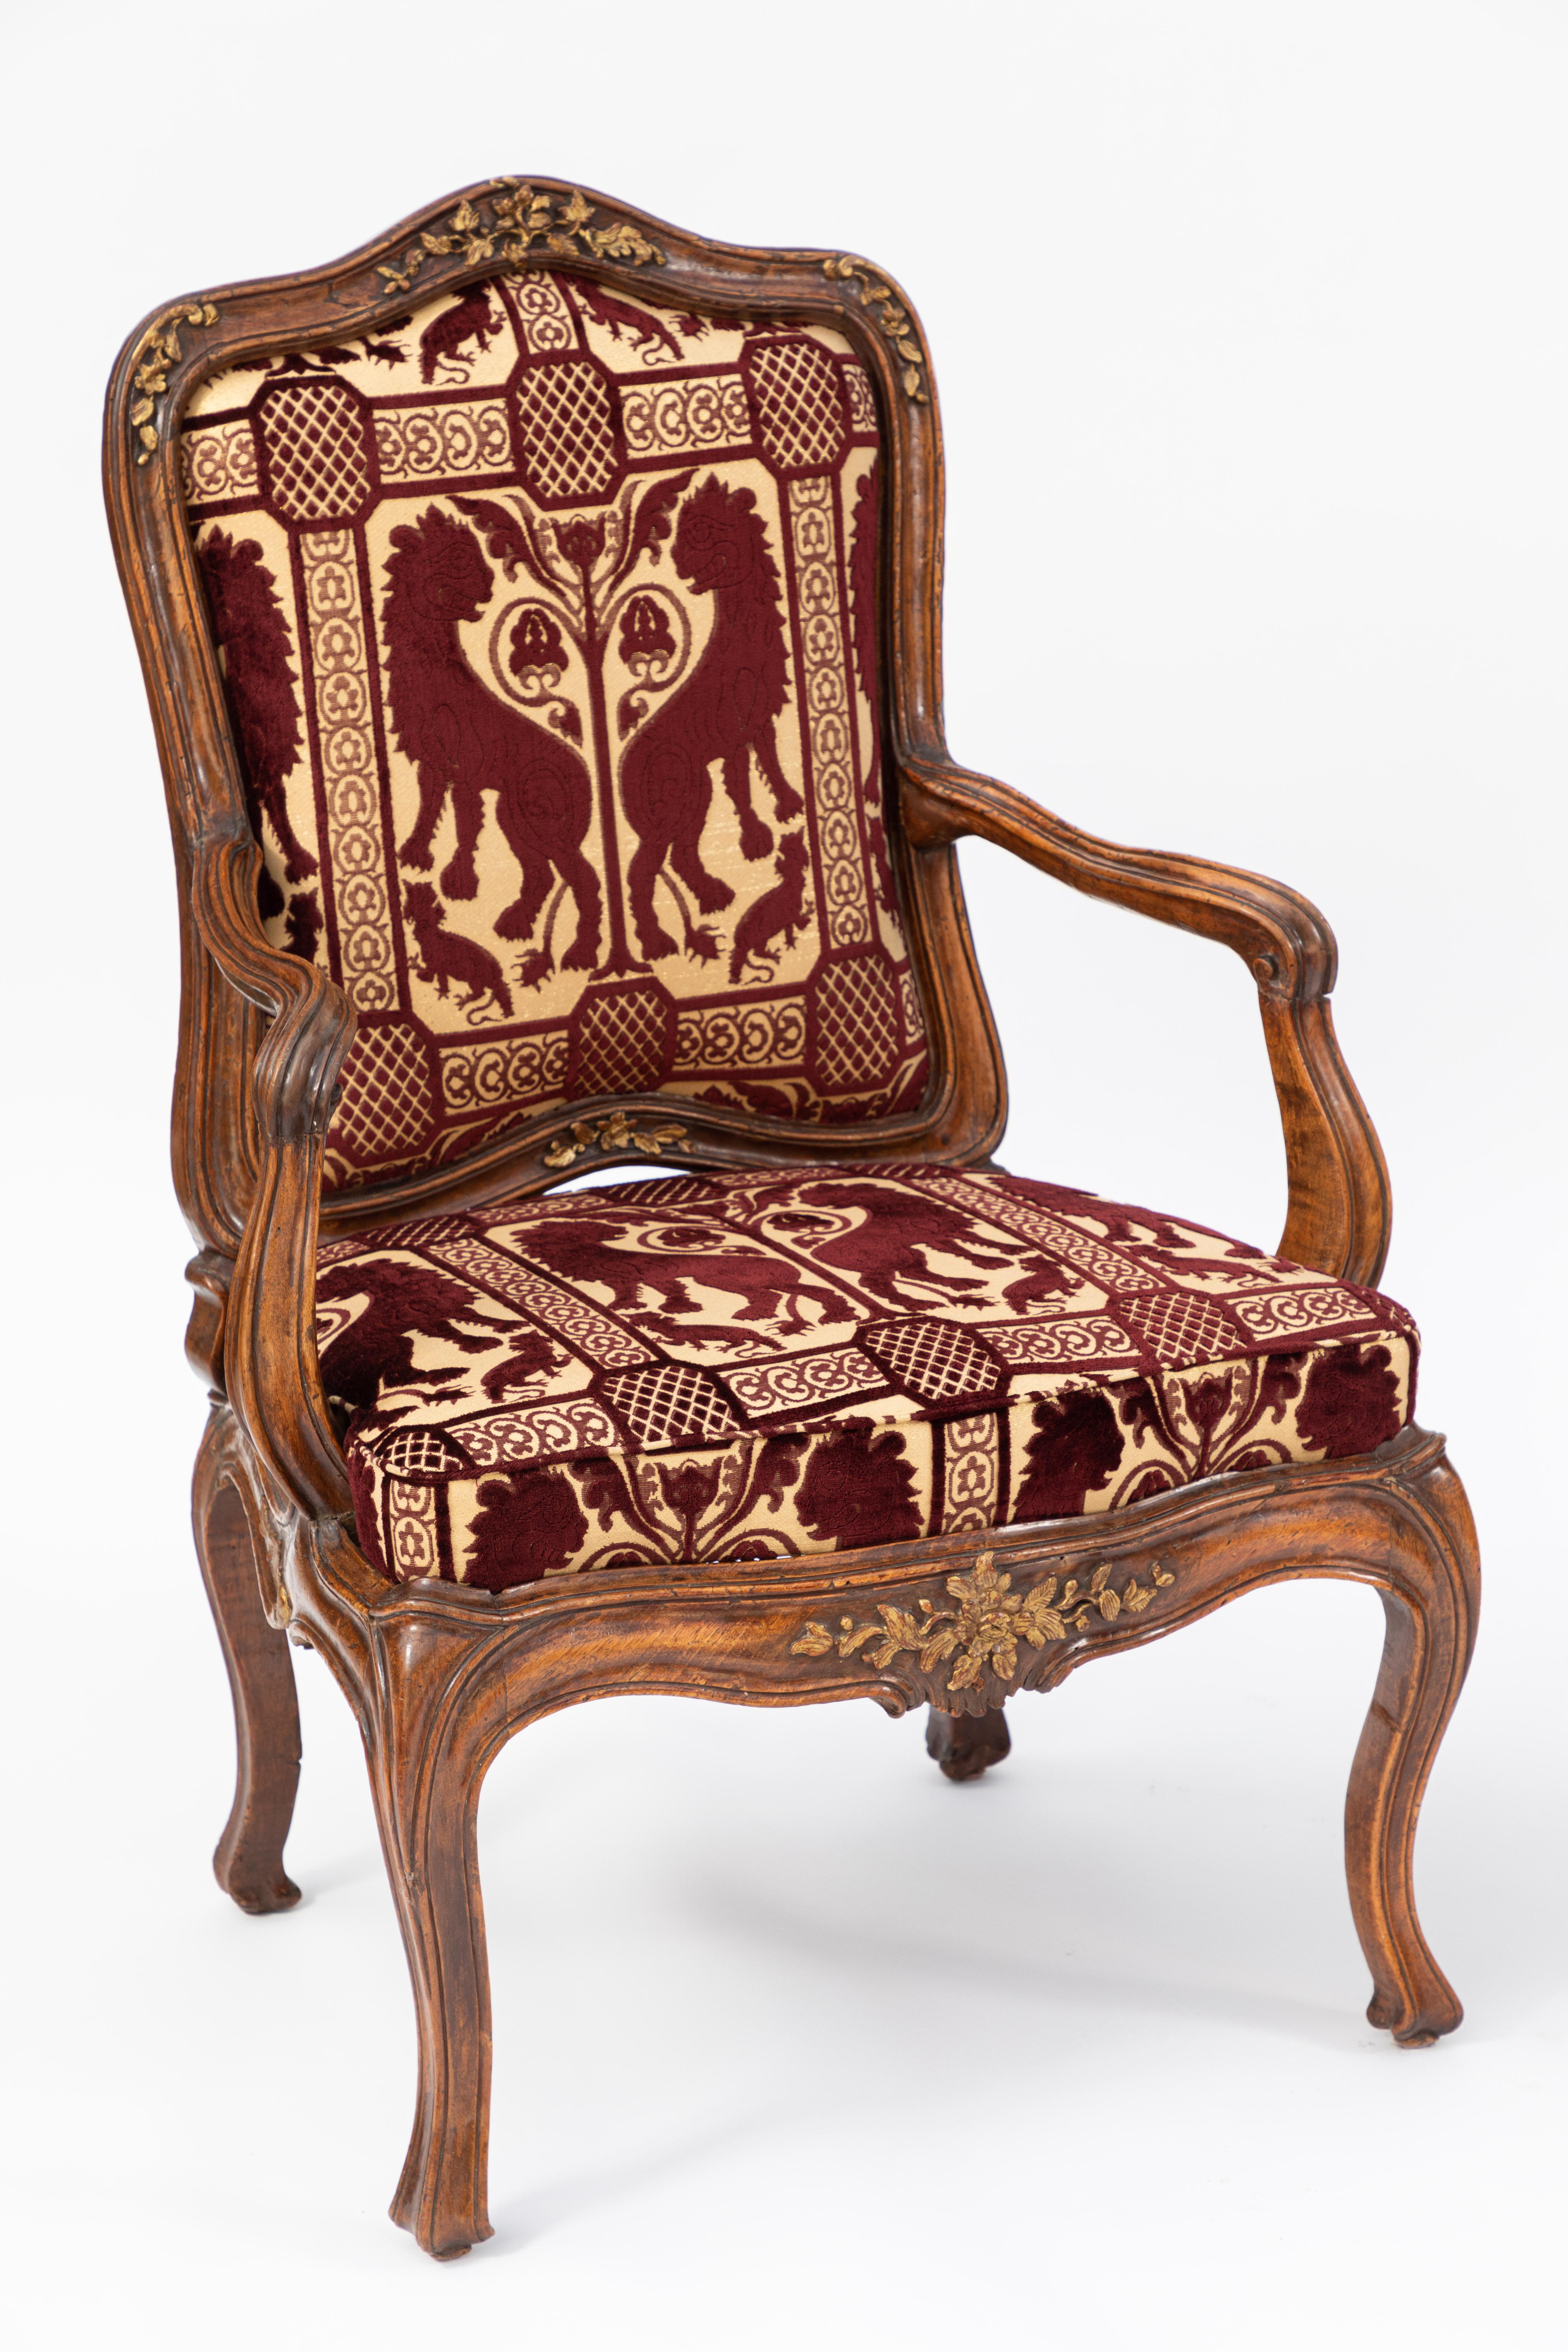 Pair of 18th century Venetian carved walnut armchairs with vintage Luigi Belavaqua silk velvet fabric in gold and maroon.